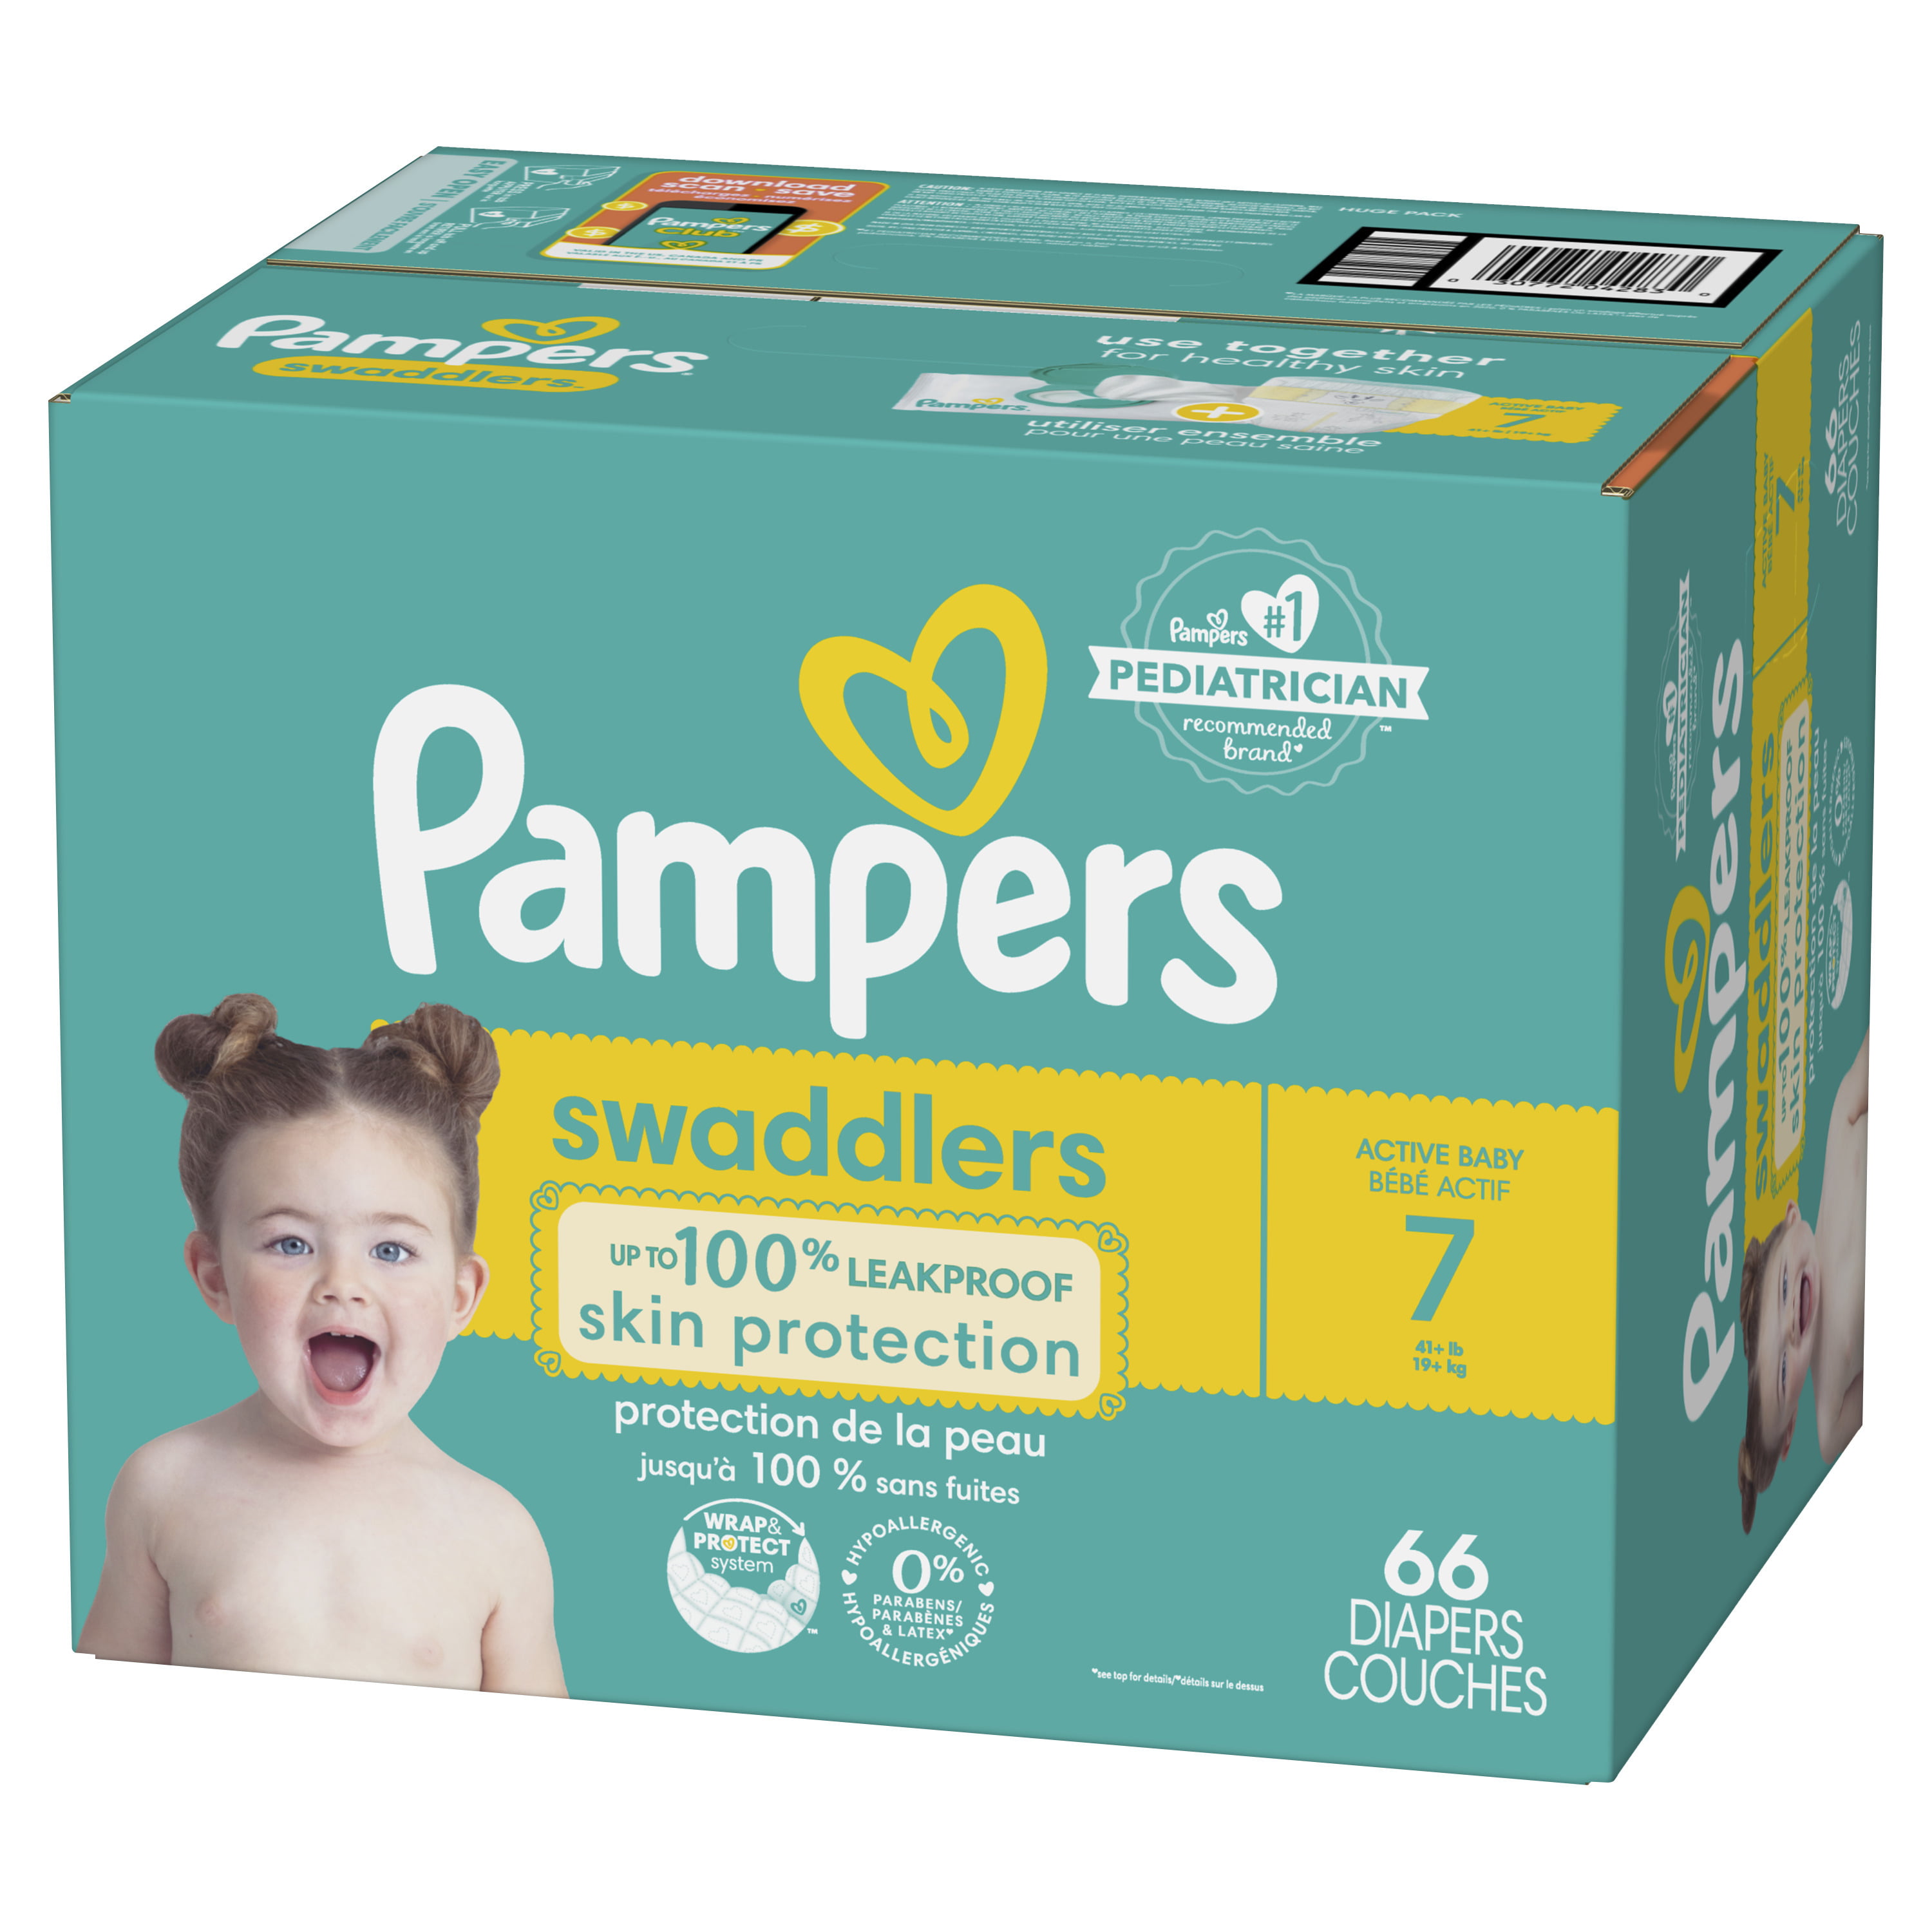 Pampers Swaddlers Active Baby Diaper, Size 7, 66 Count - 1